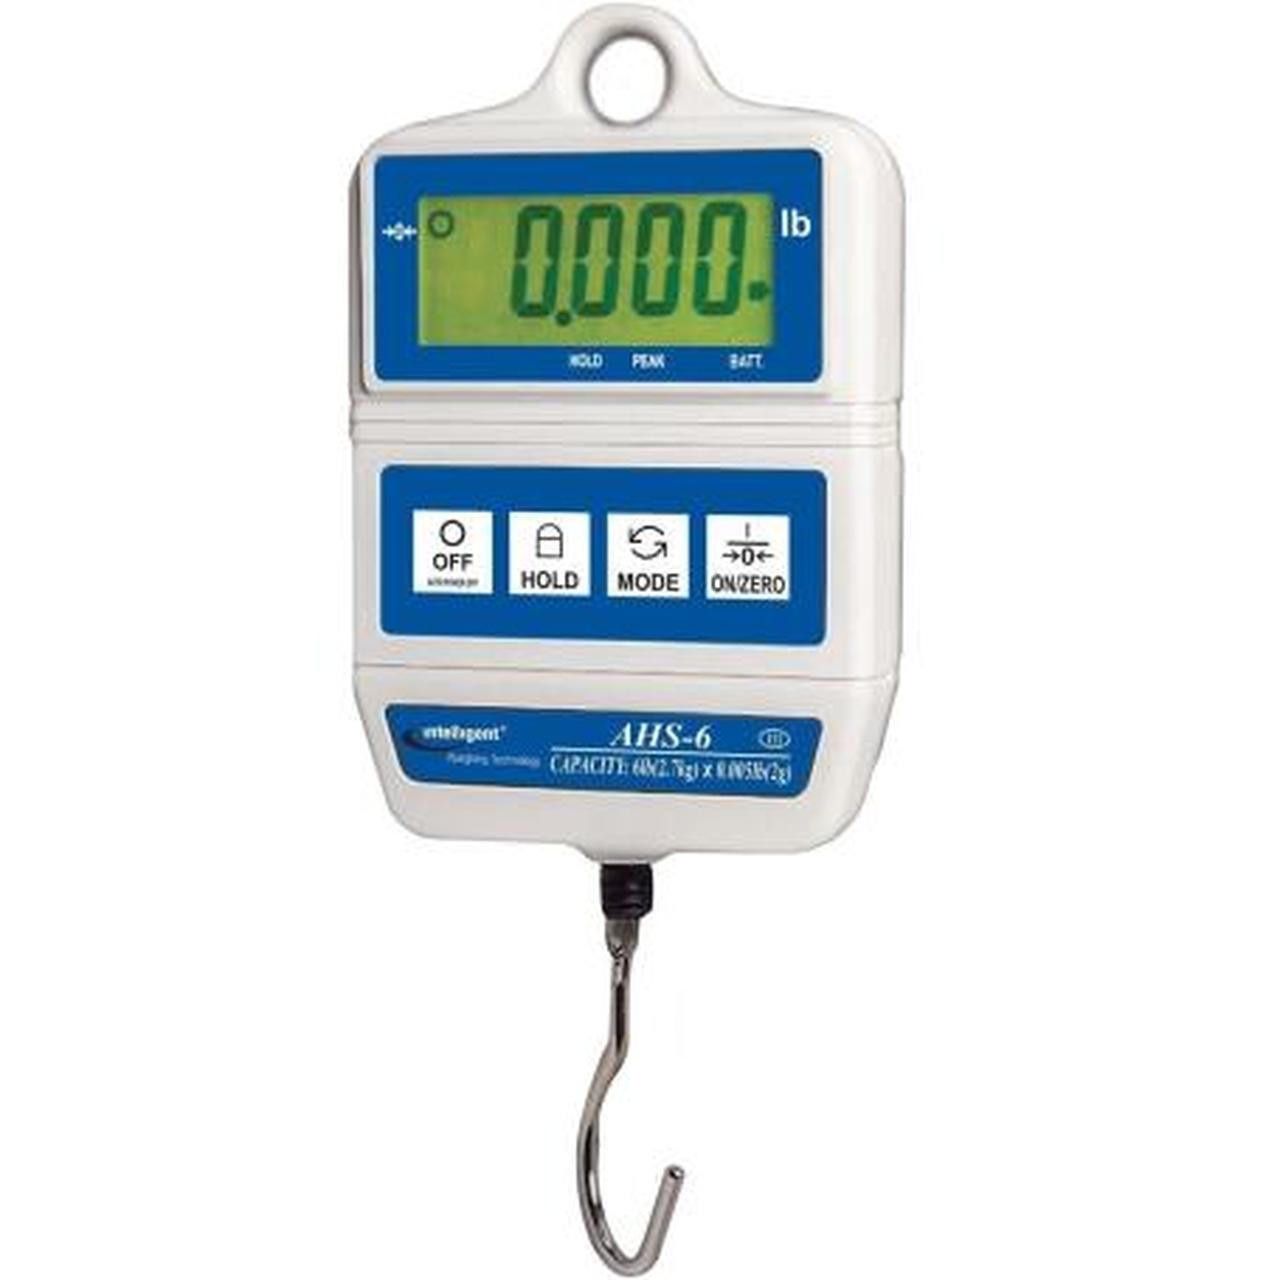 Portable Digital Hanging Weight Scale - Black